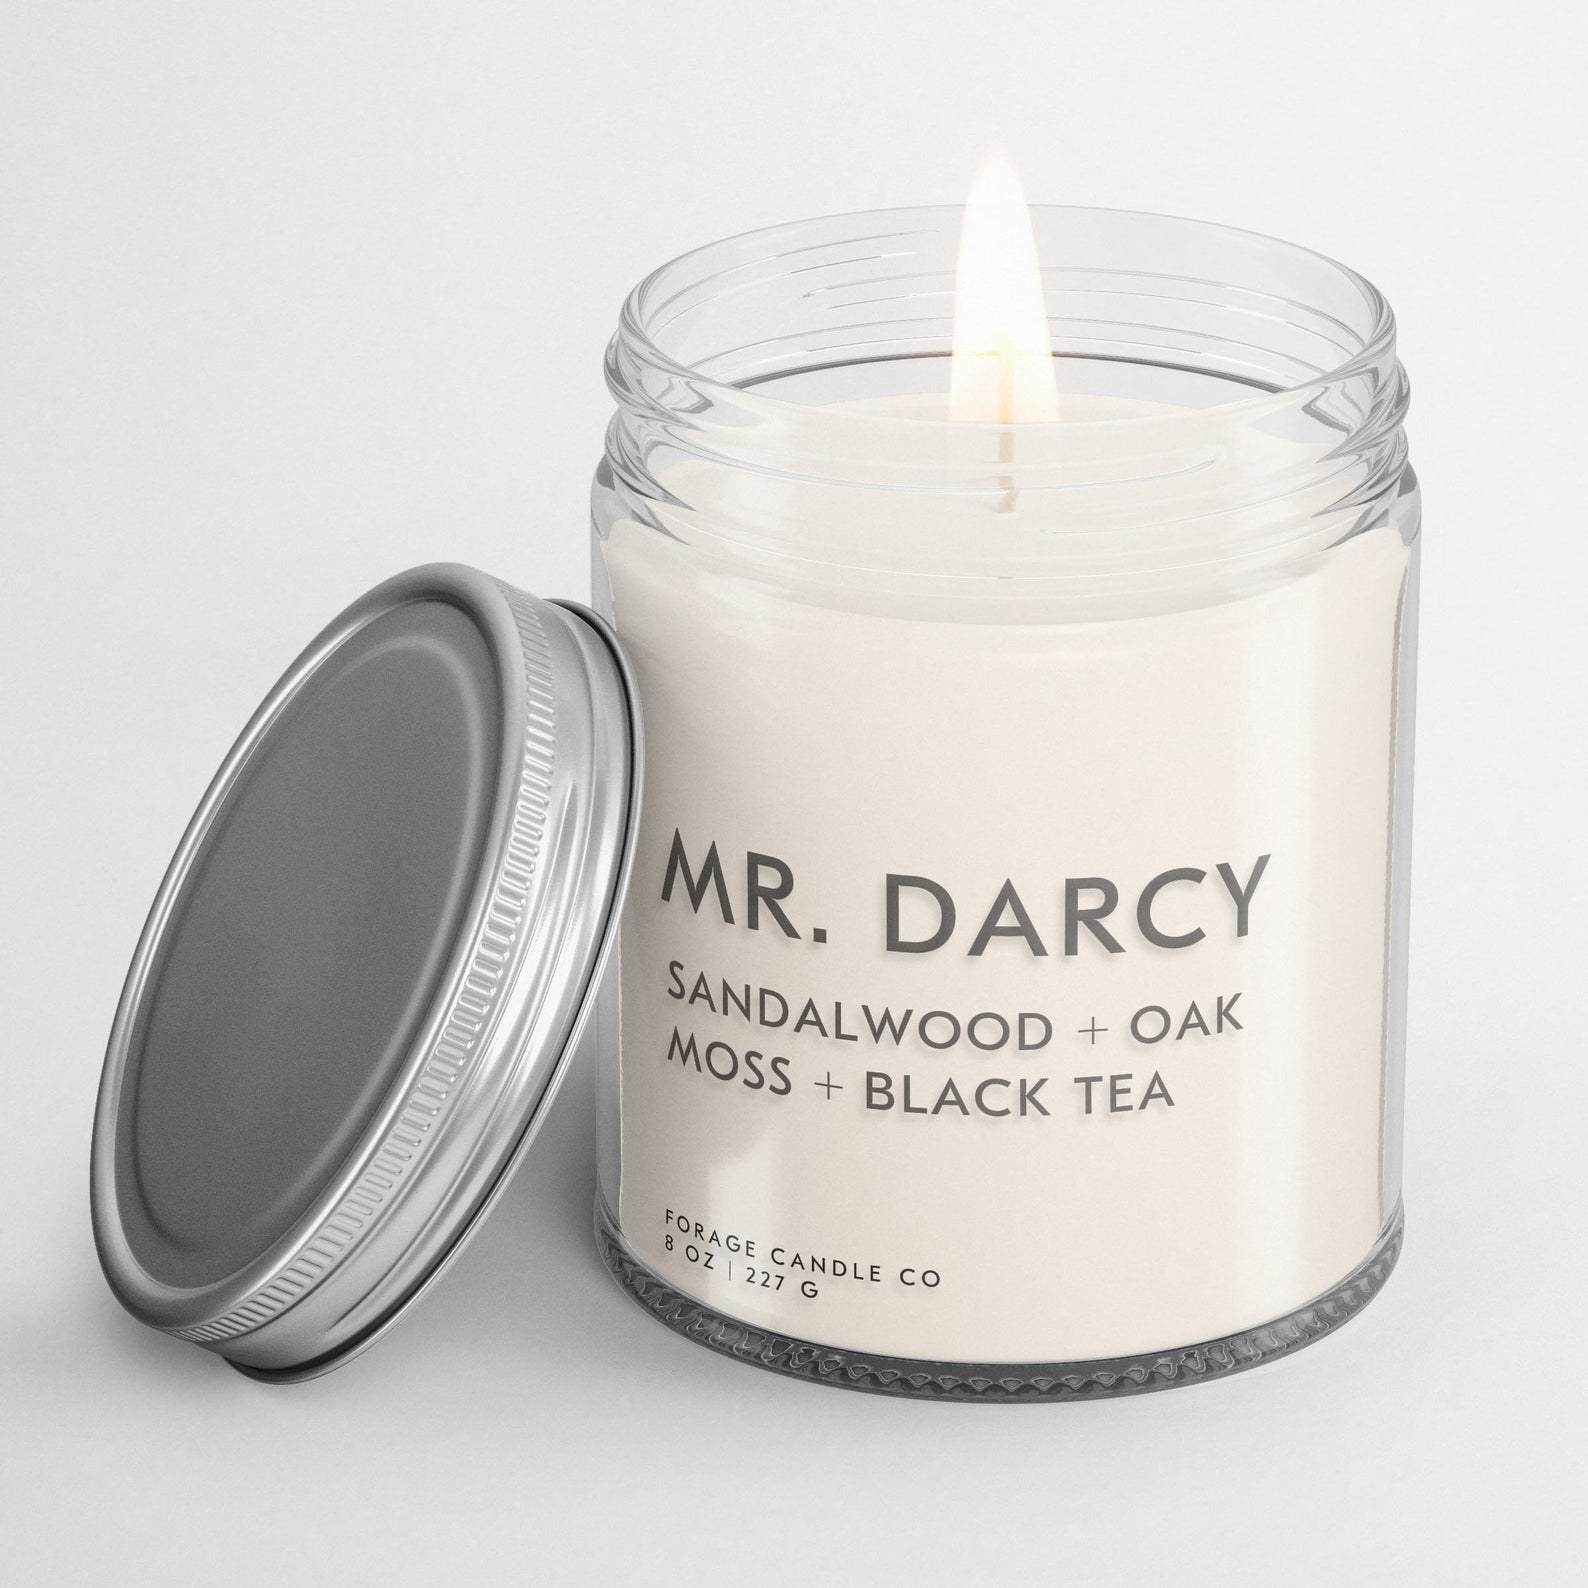 A Mr. Darcy candle that smells like sandalwood, oak moss, and black tea 